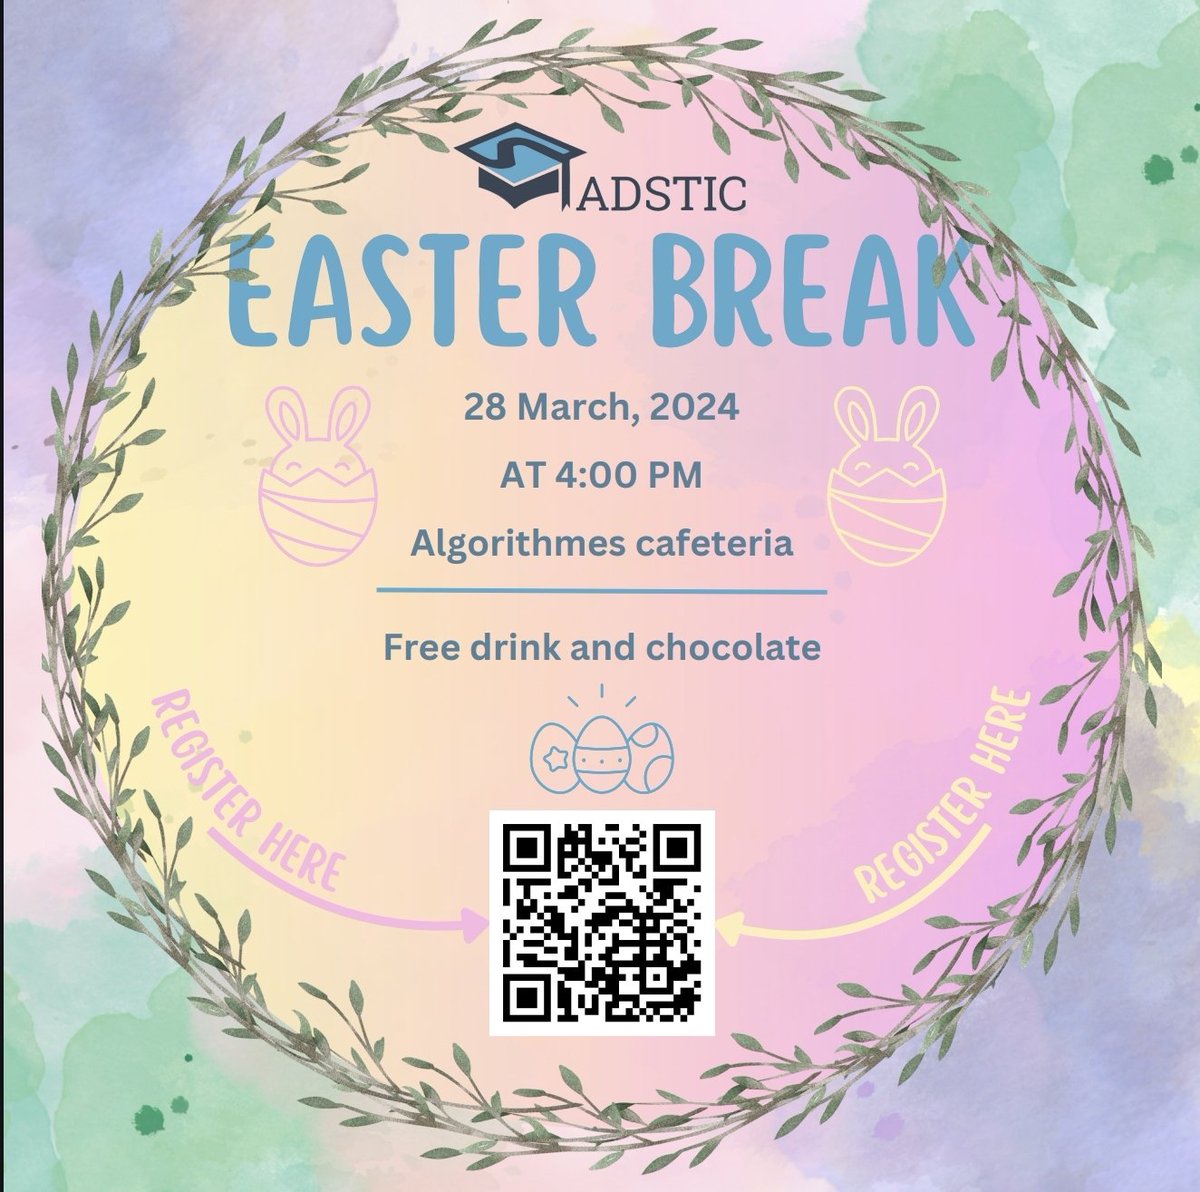 ADSTIC invite you to our Easter Break 2024 to celebrate Easter and our shared love of chocolate, on Thursday, the 28th of March 2024 starting at 4 PM at the Algorithmes cafeteria 🍫🐰 ➡️ Registration link : forms.gle/whF34iV3M7L1uq… ⚠️ End of registration : 27/03/2024 at 11 PM